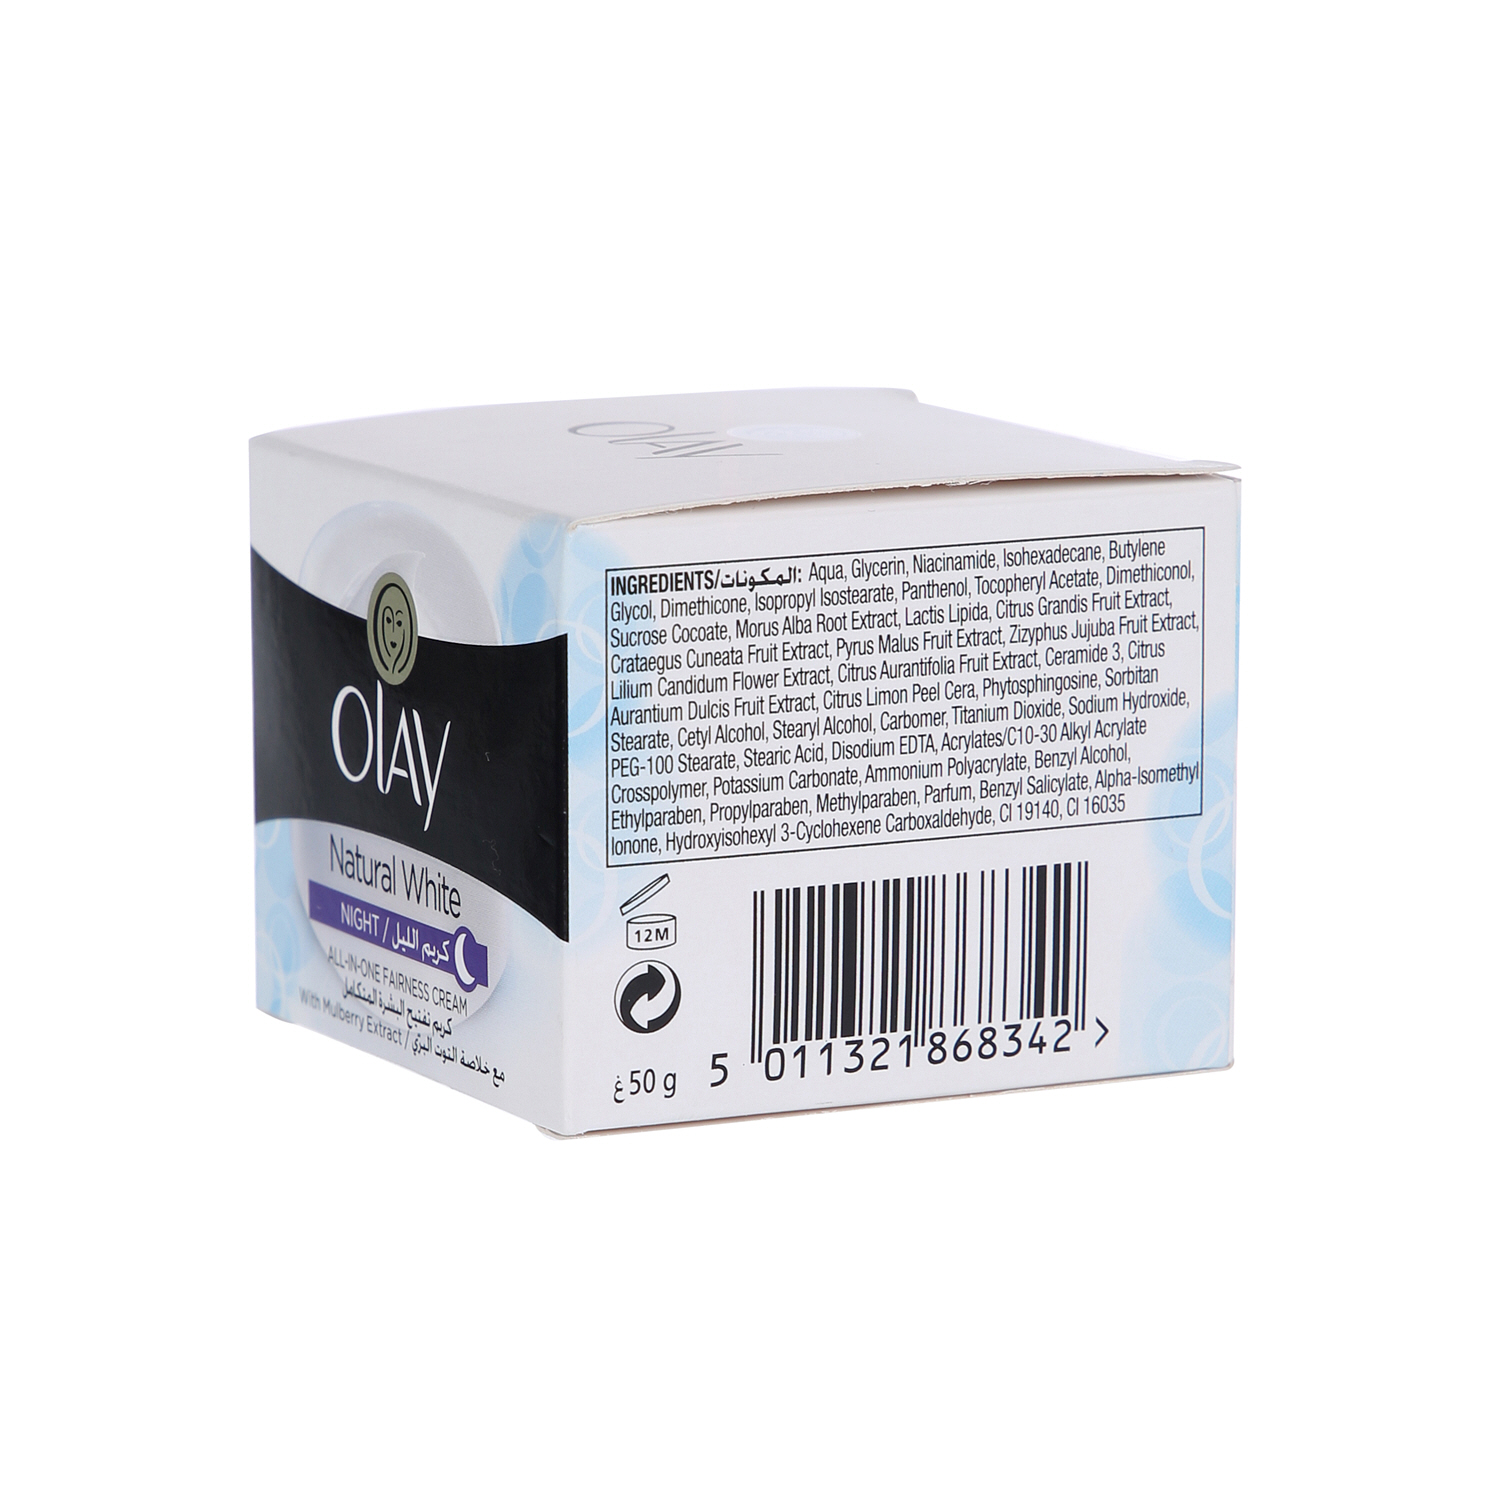 Olay Natural White Night Face Cream Apple 50gm